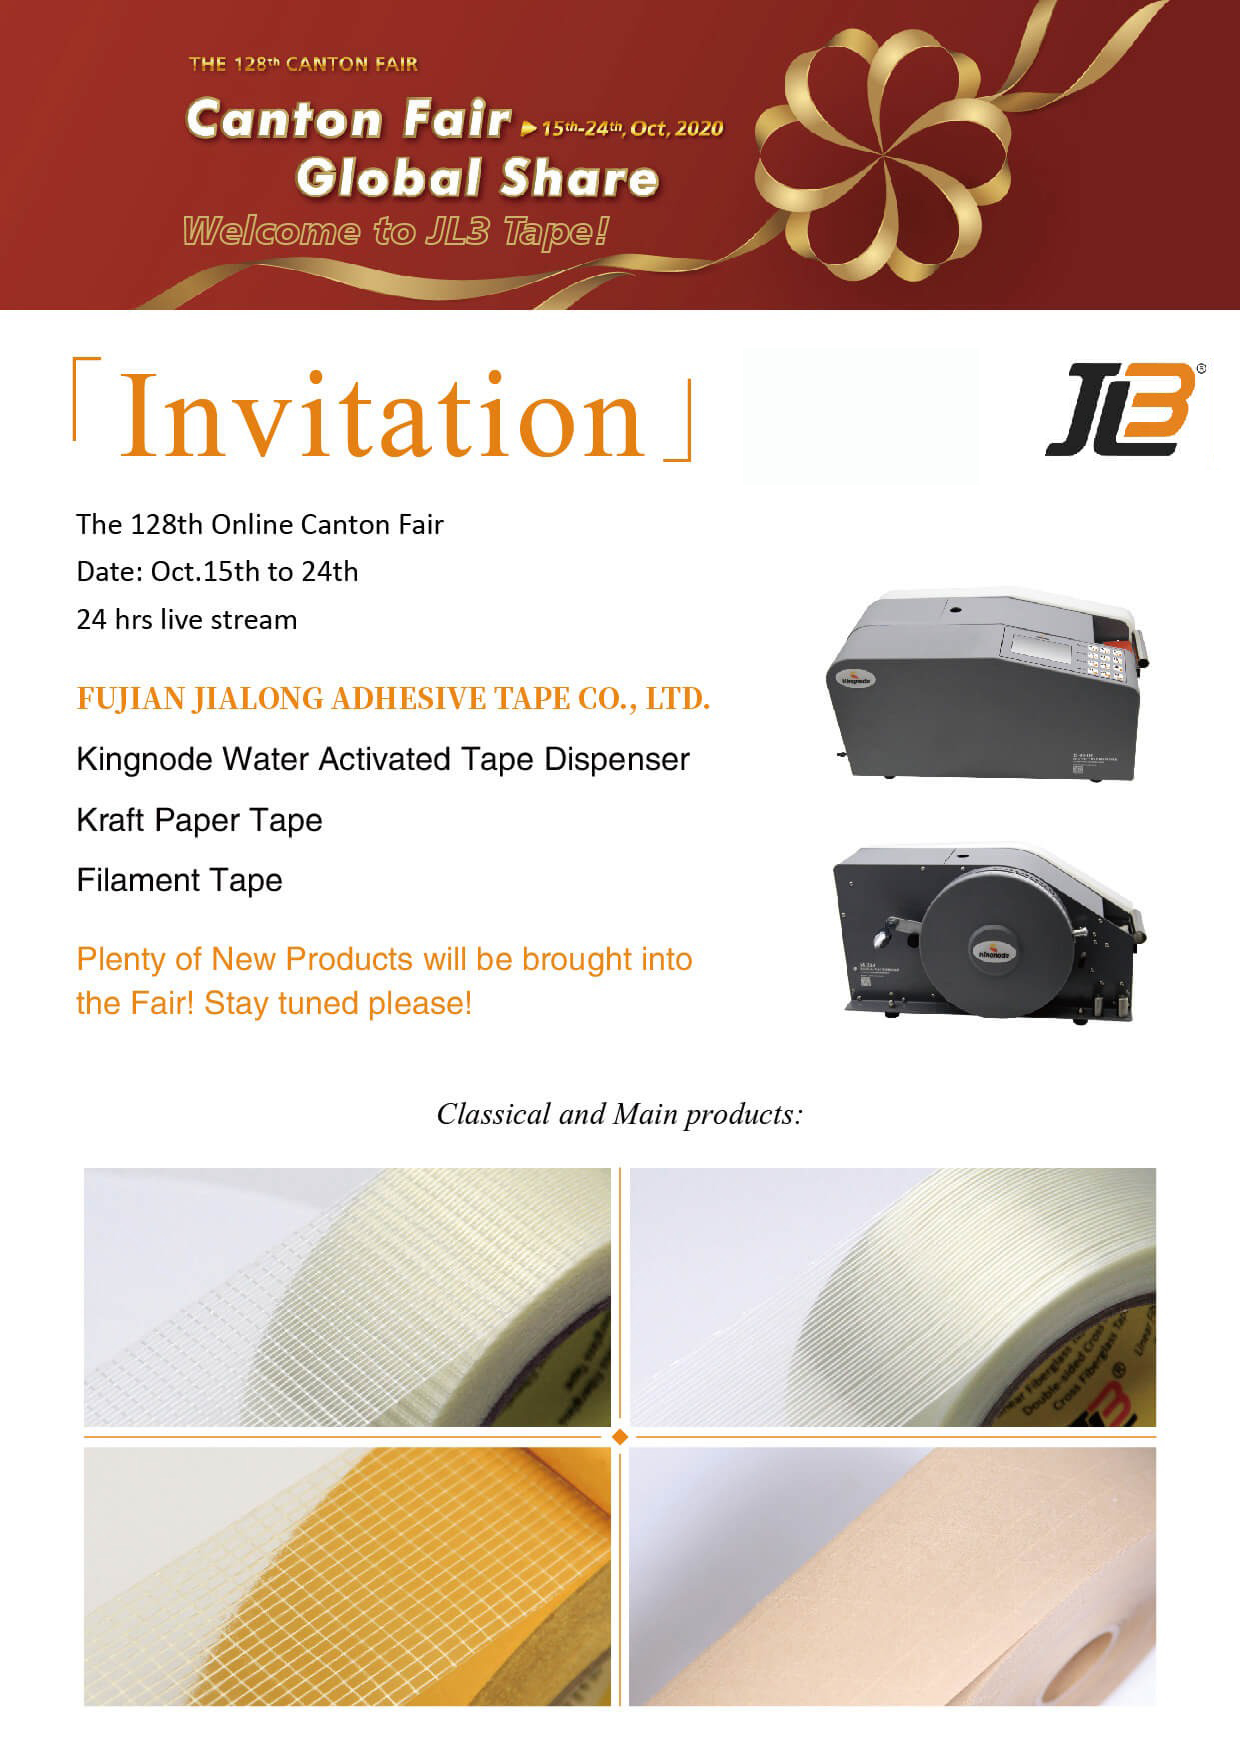 Invitation of the 128th Canton Fair from JL3 Tape